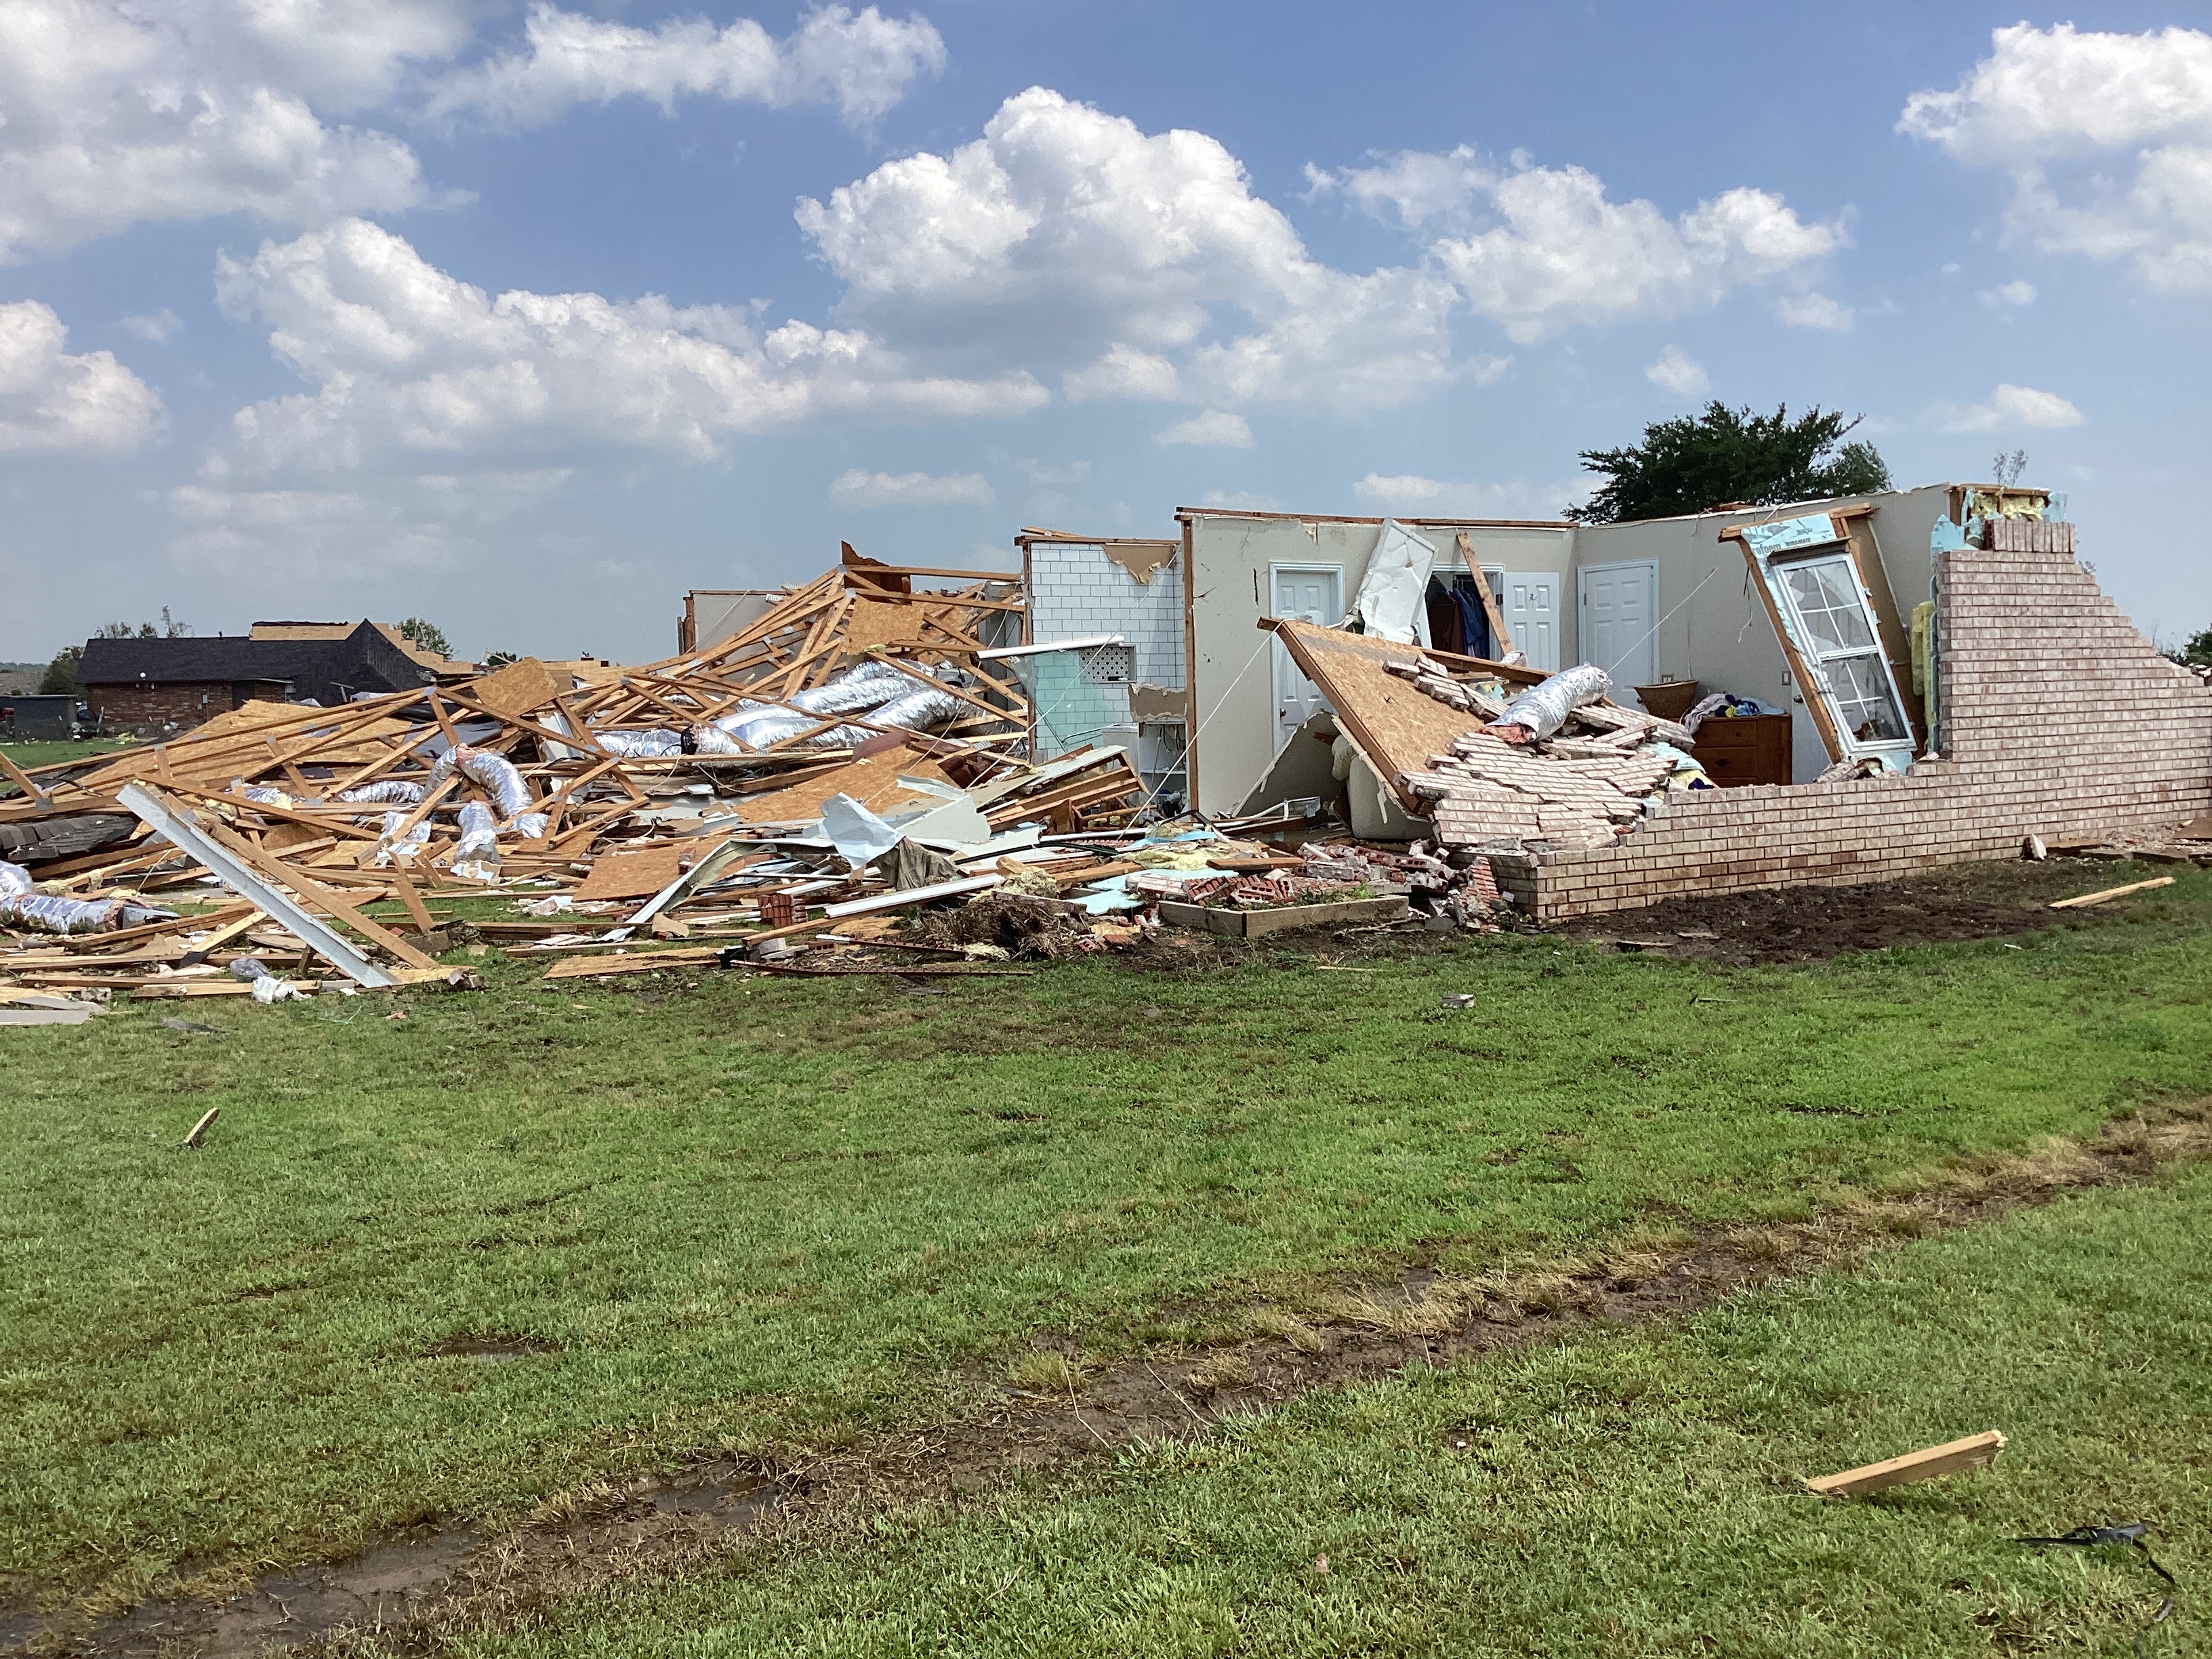 A home that was mostly destroyed at EF3 intensity east of Claremore, Oklahoma from the EF3 Keetonville–Claremore–Pryor, Oklahoma tornado.